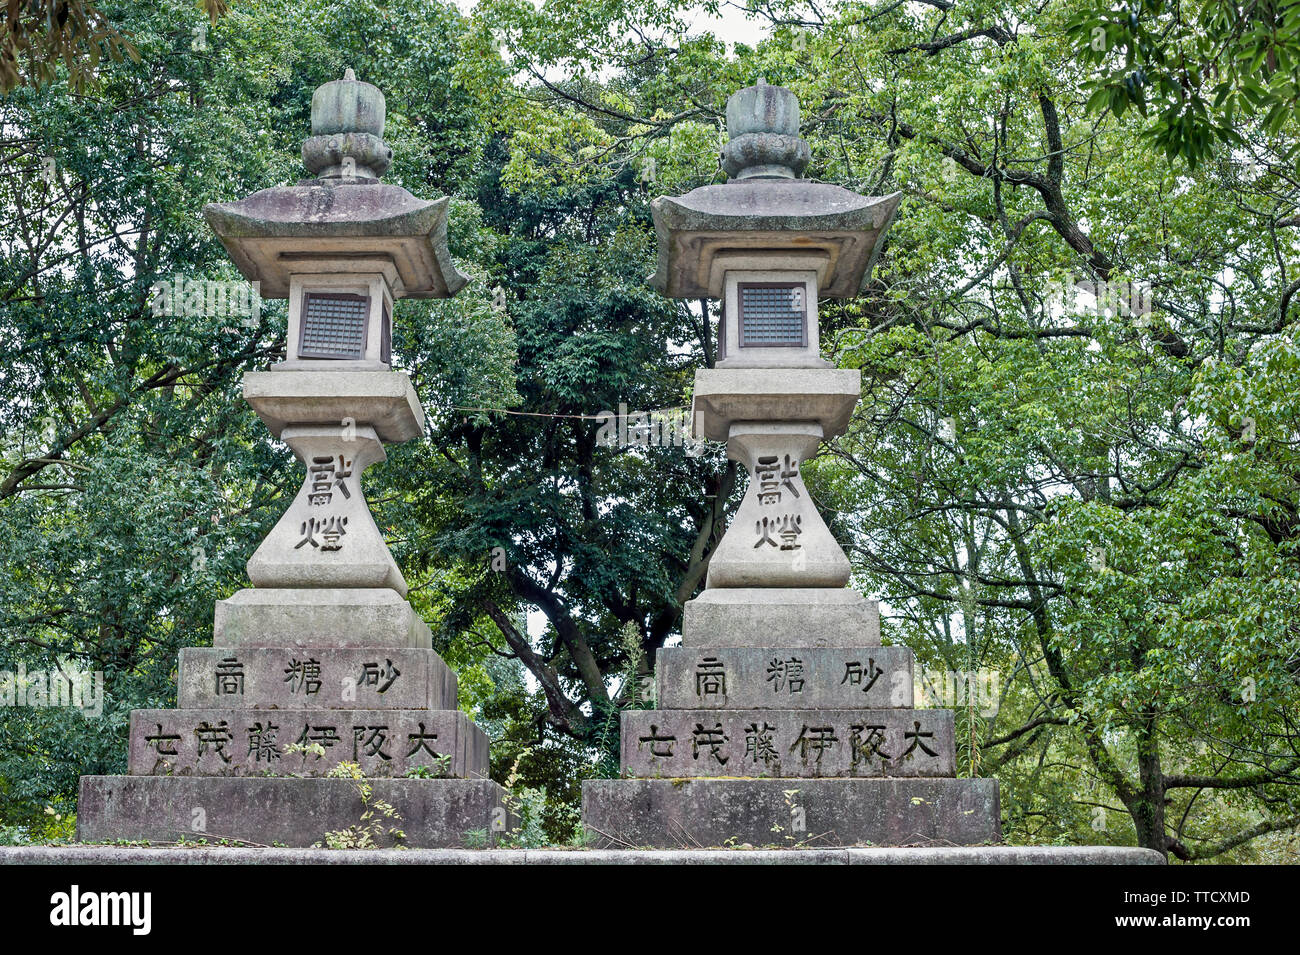 Two stone lanterns in the grounds of the Shinto Kasuga Taisha Shrine, Nara, Japan surrounded  by foliage from nearby trees Stock Photo